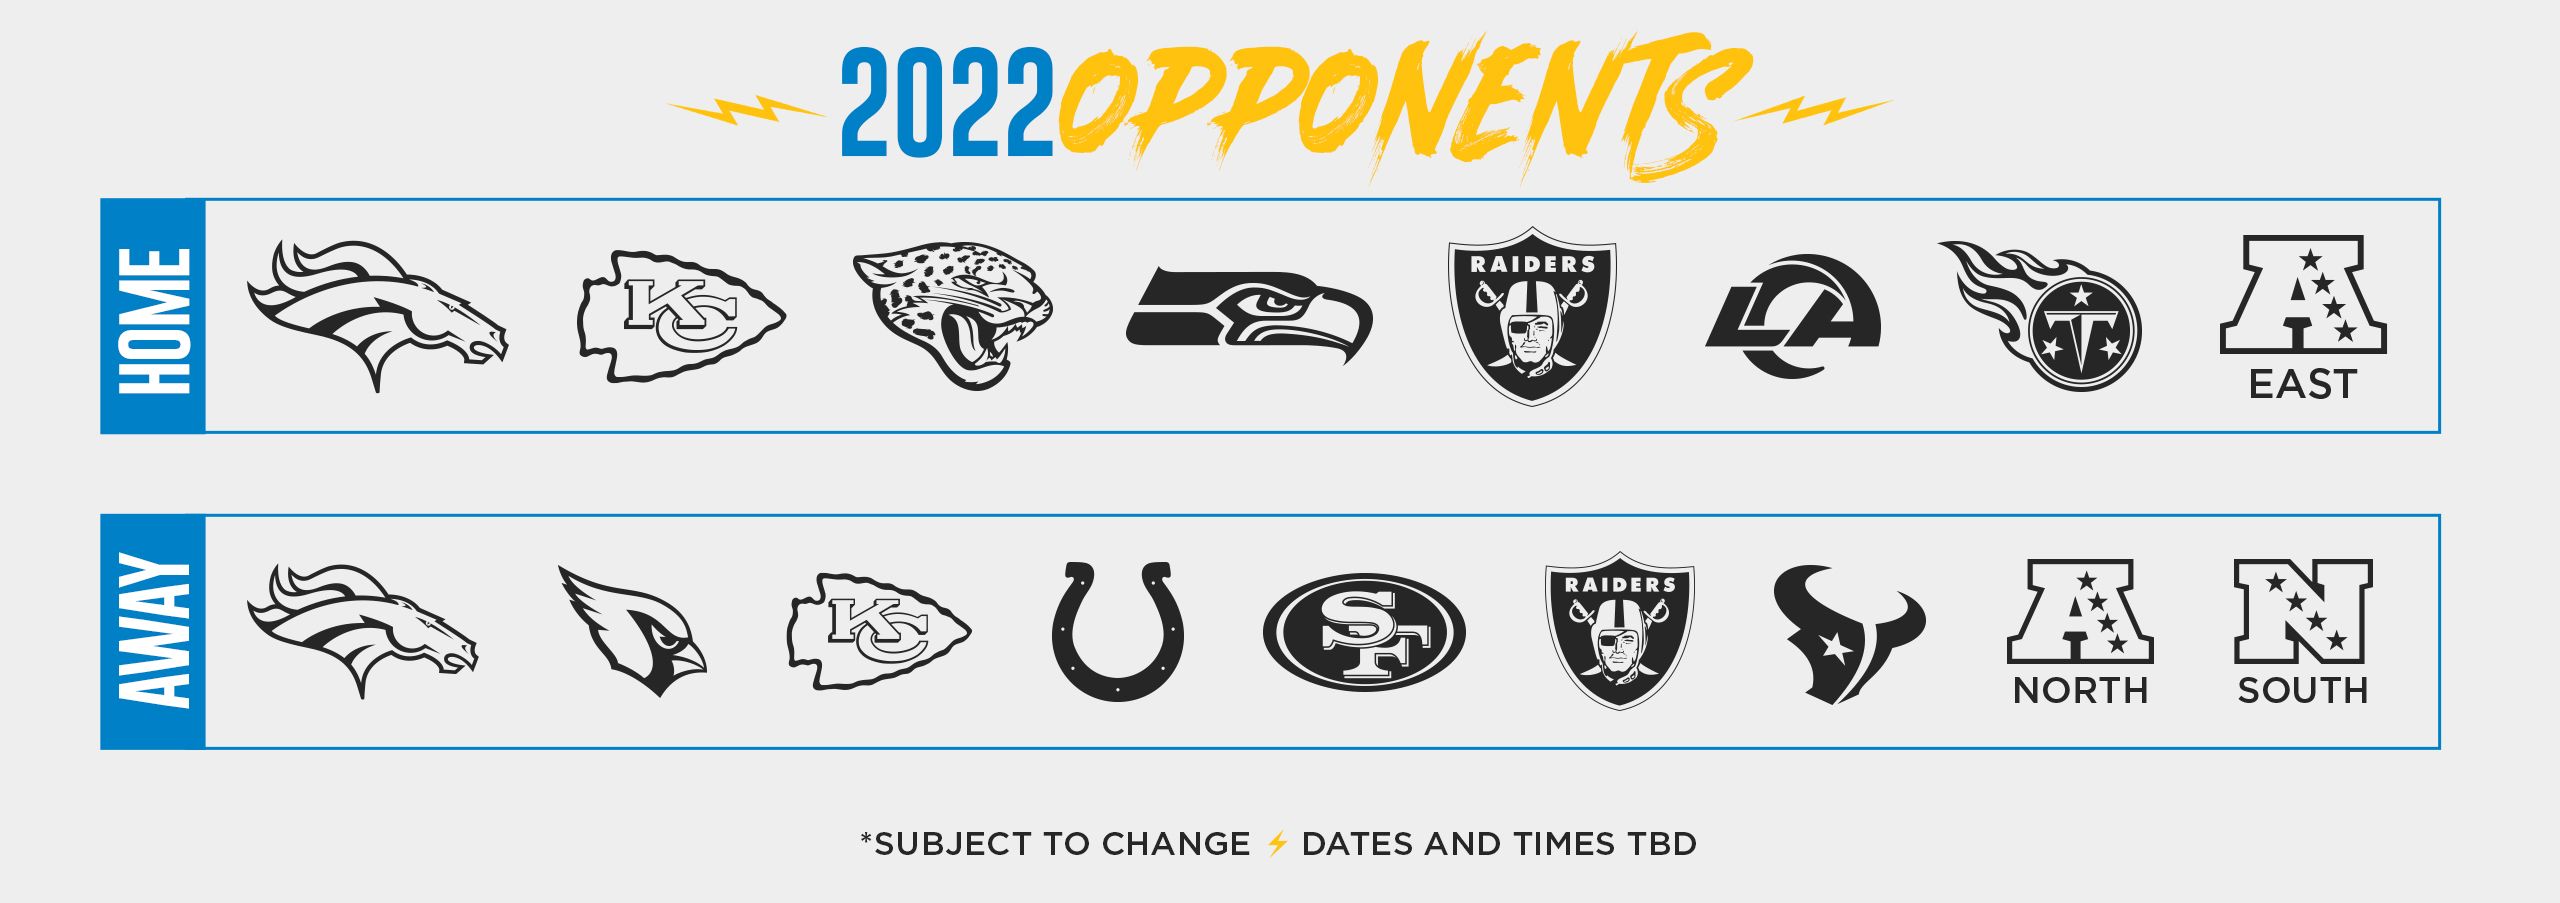 Chargers 2022 Future Opponents Los Angeles Chargers Chargers Com